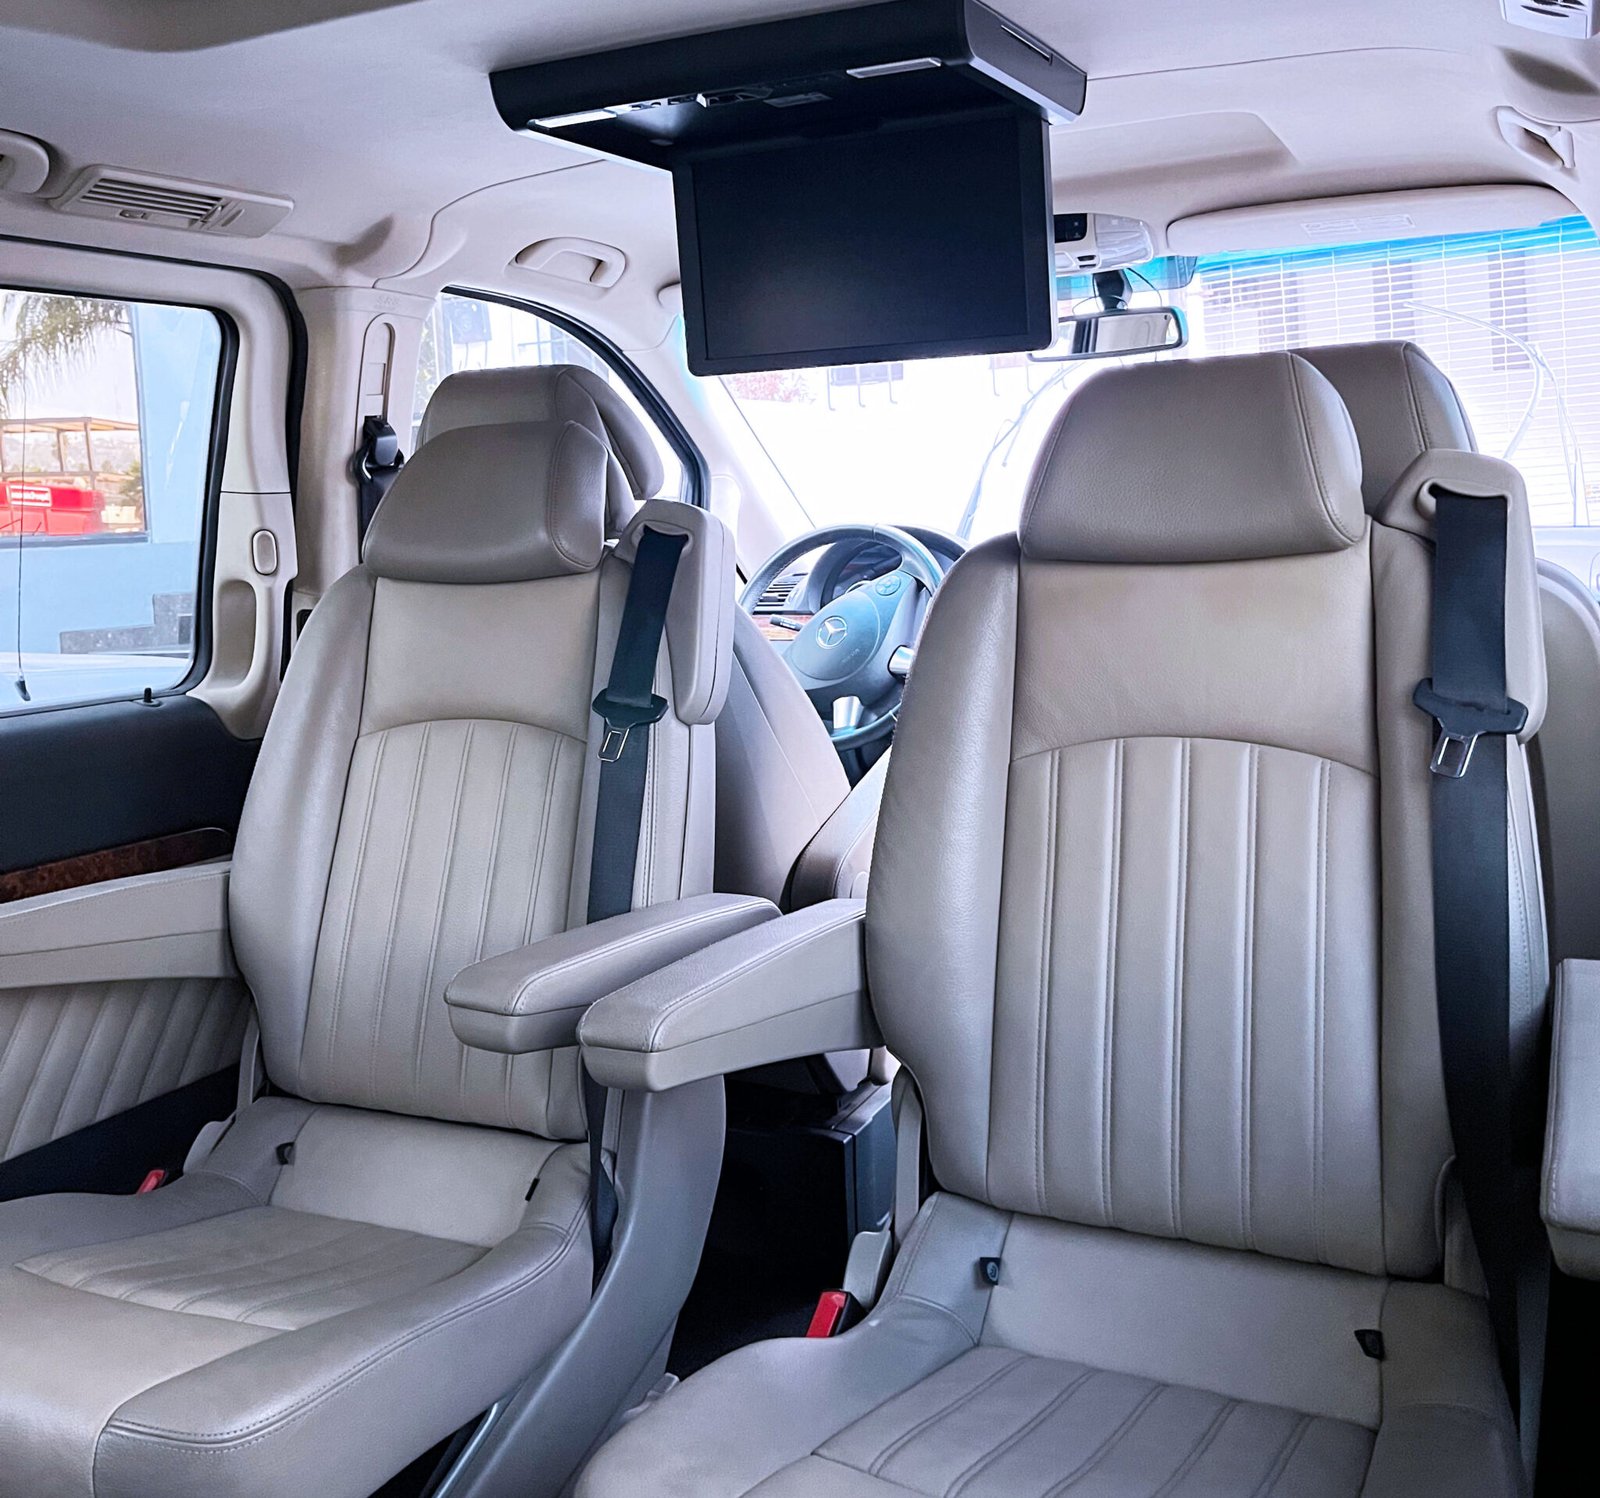 A glimpse inside a luxurious patient transport van, featuring seating for up to four passengers in opulent comfort.